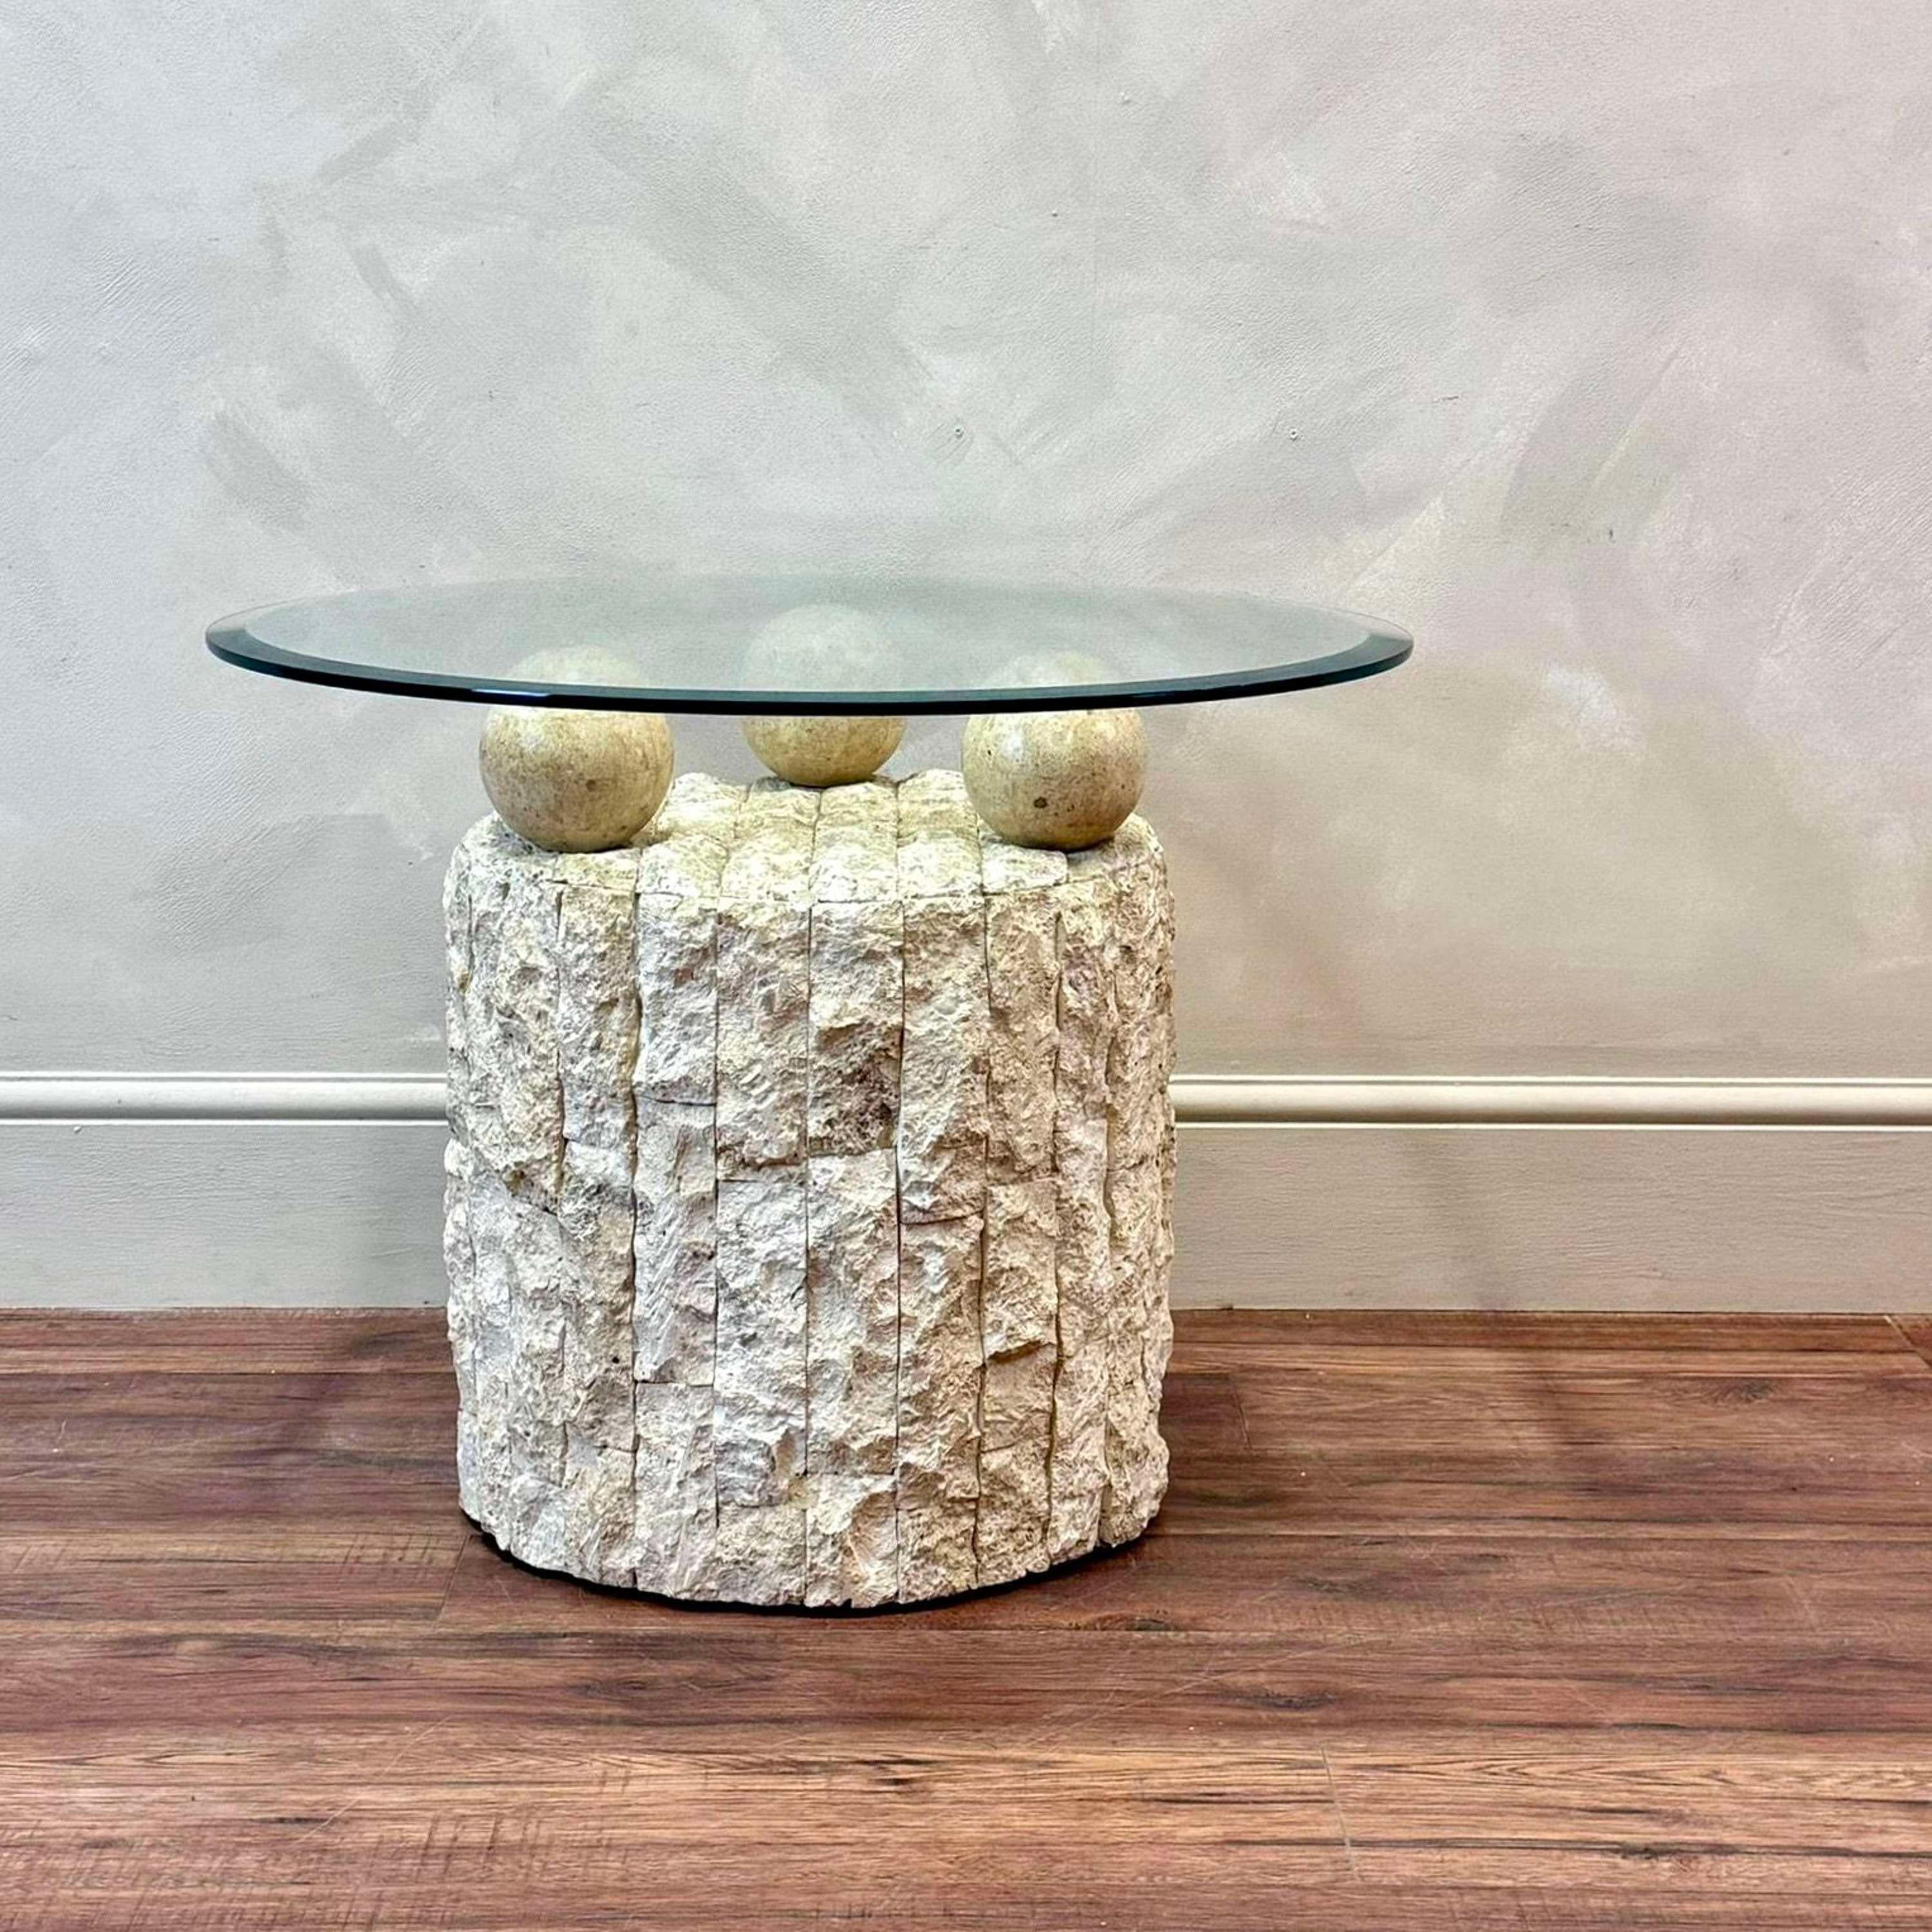 Postmodern design, coffee / side table by Magnusse Ponte. 
The base made from Mactan stone.
Three stone balls hold the removable, bevel edged round glass top.

Circa 1980.

Dimensions:H: 53.5cm (21.1